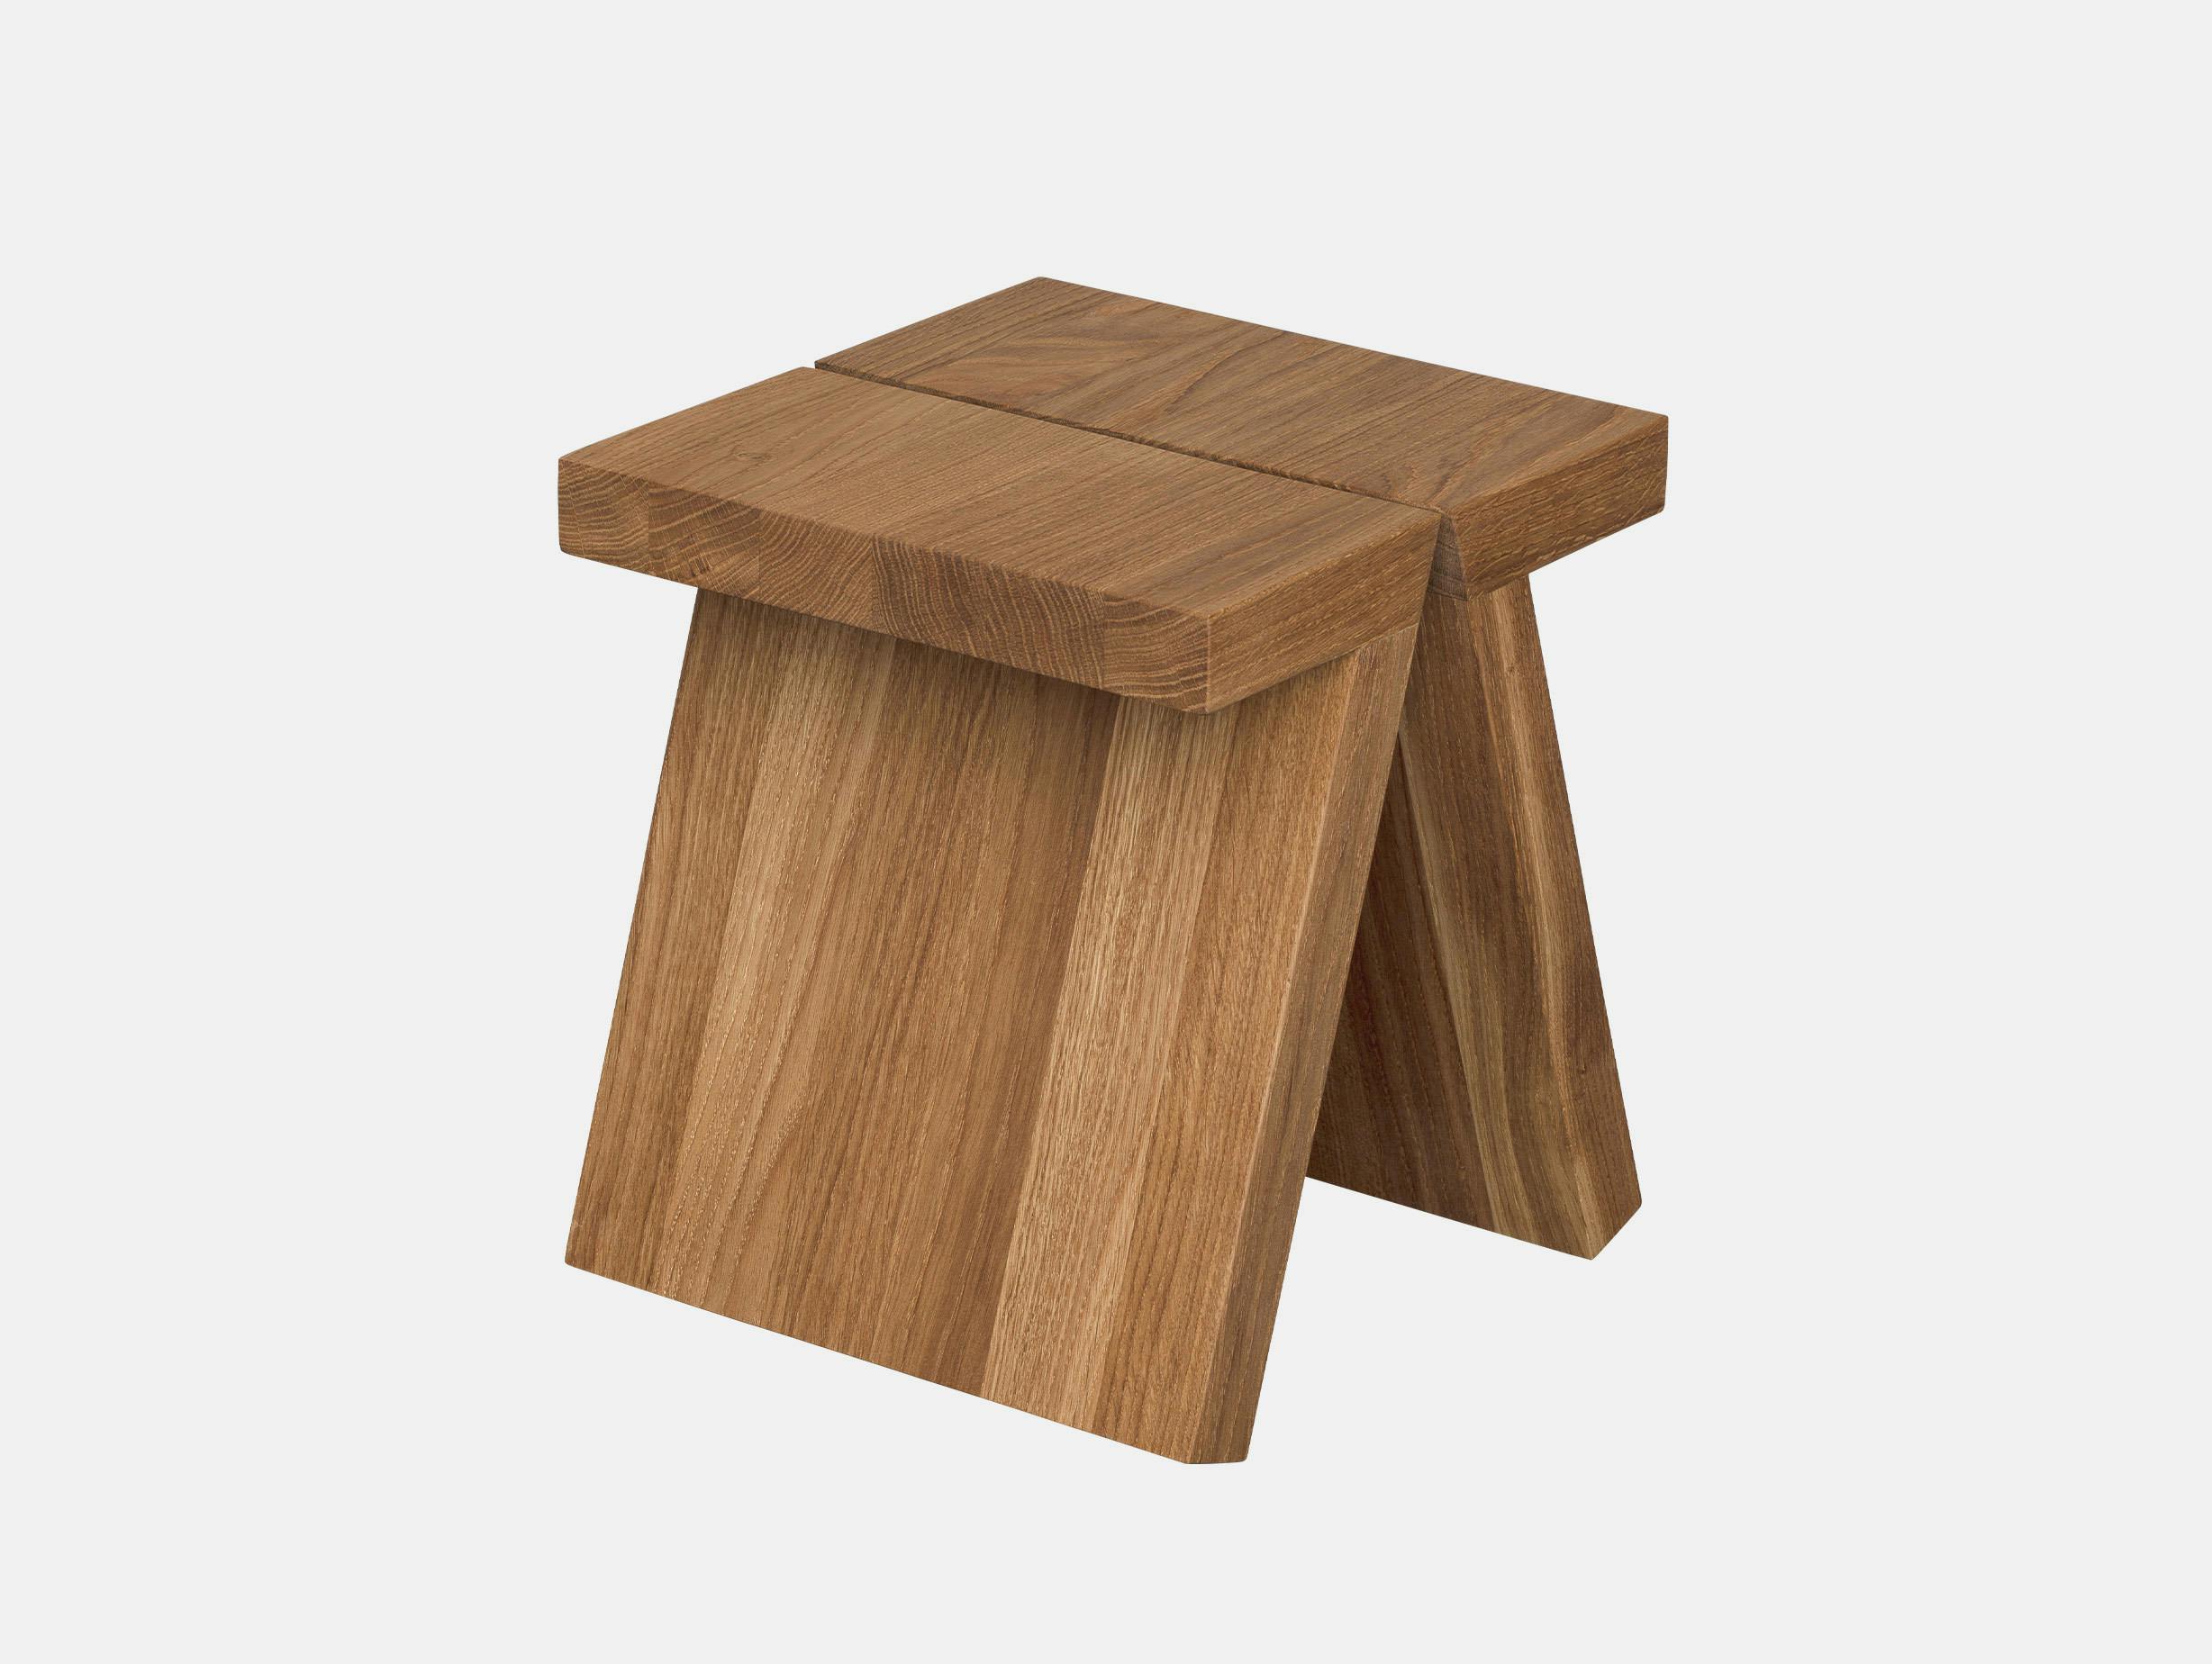 Fogia supersolid object 1 oak stool